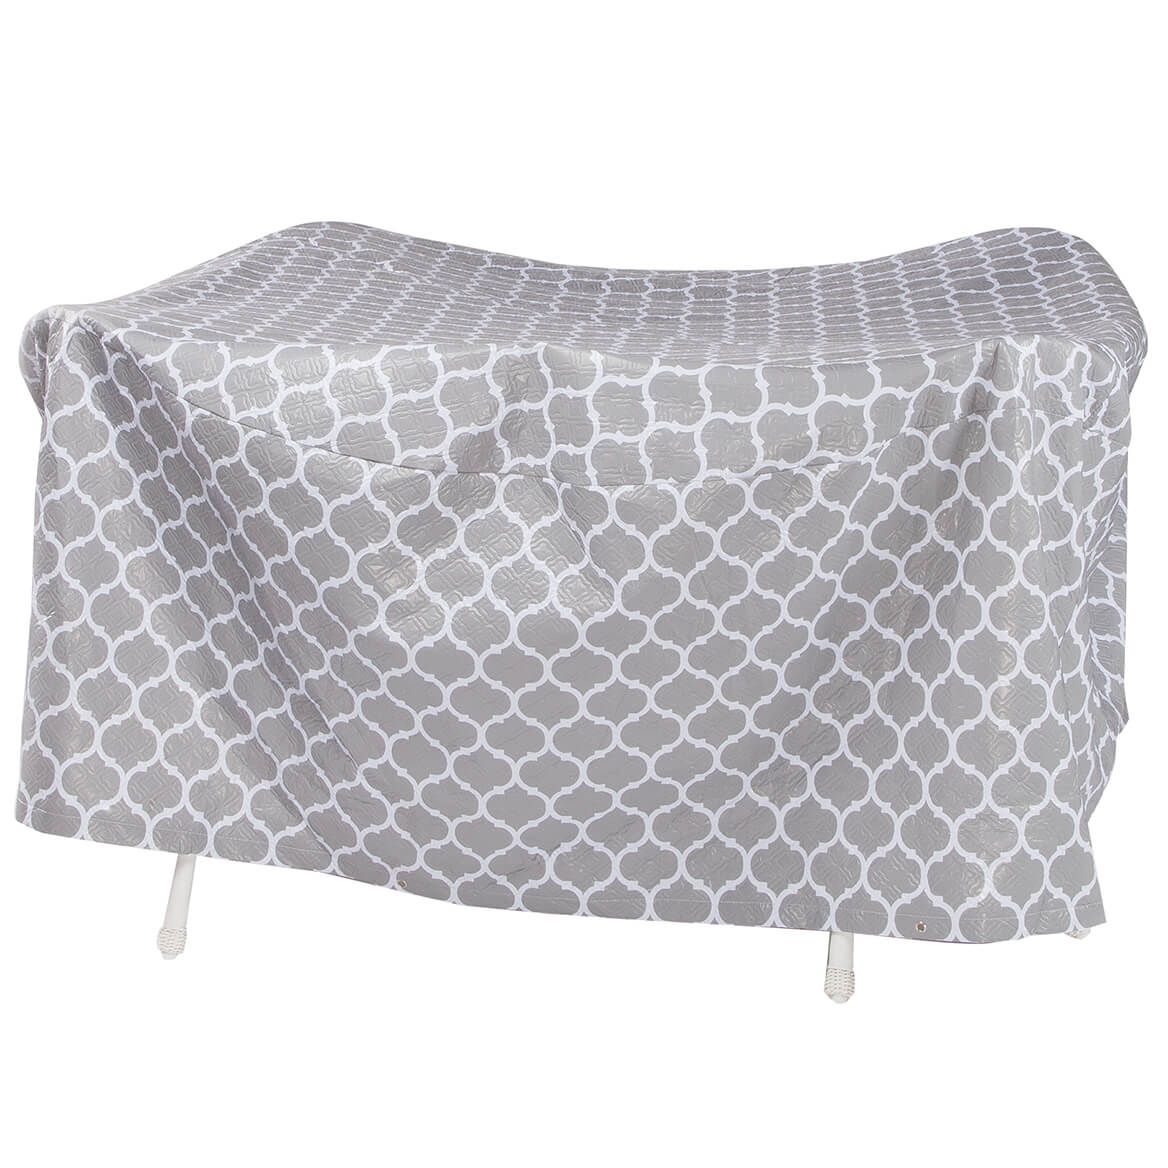 Trellis Pattern Quilted Table Cover Round, 30"H x 84" Dia. + '-' + 362886